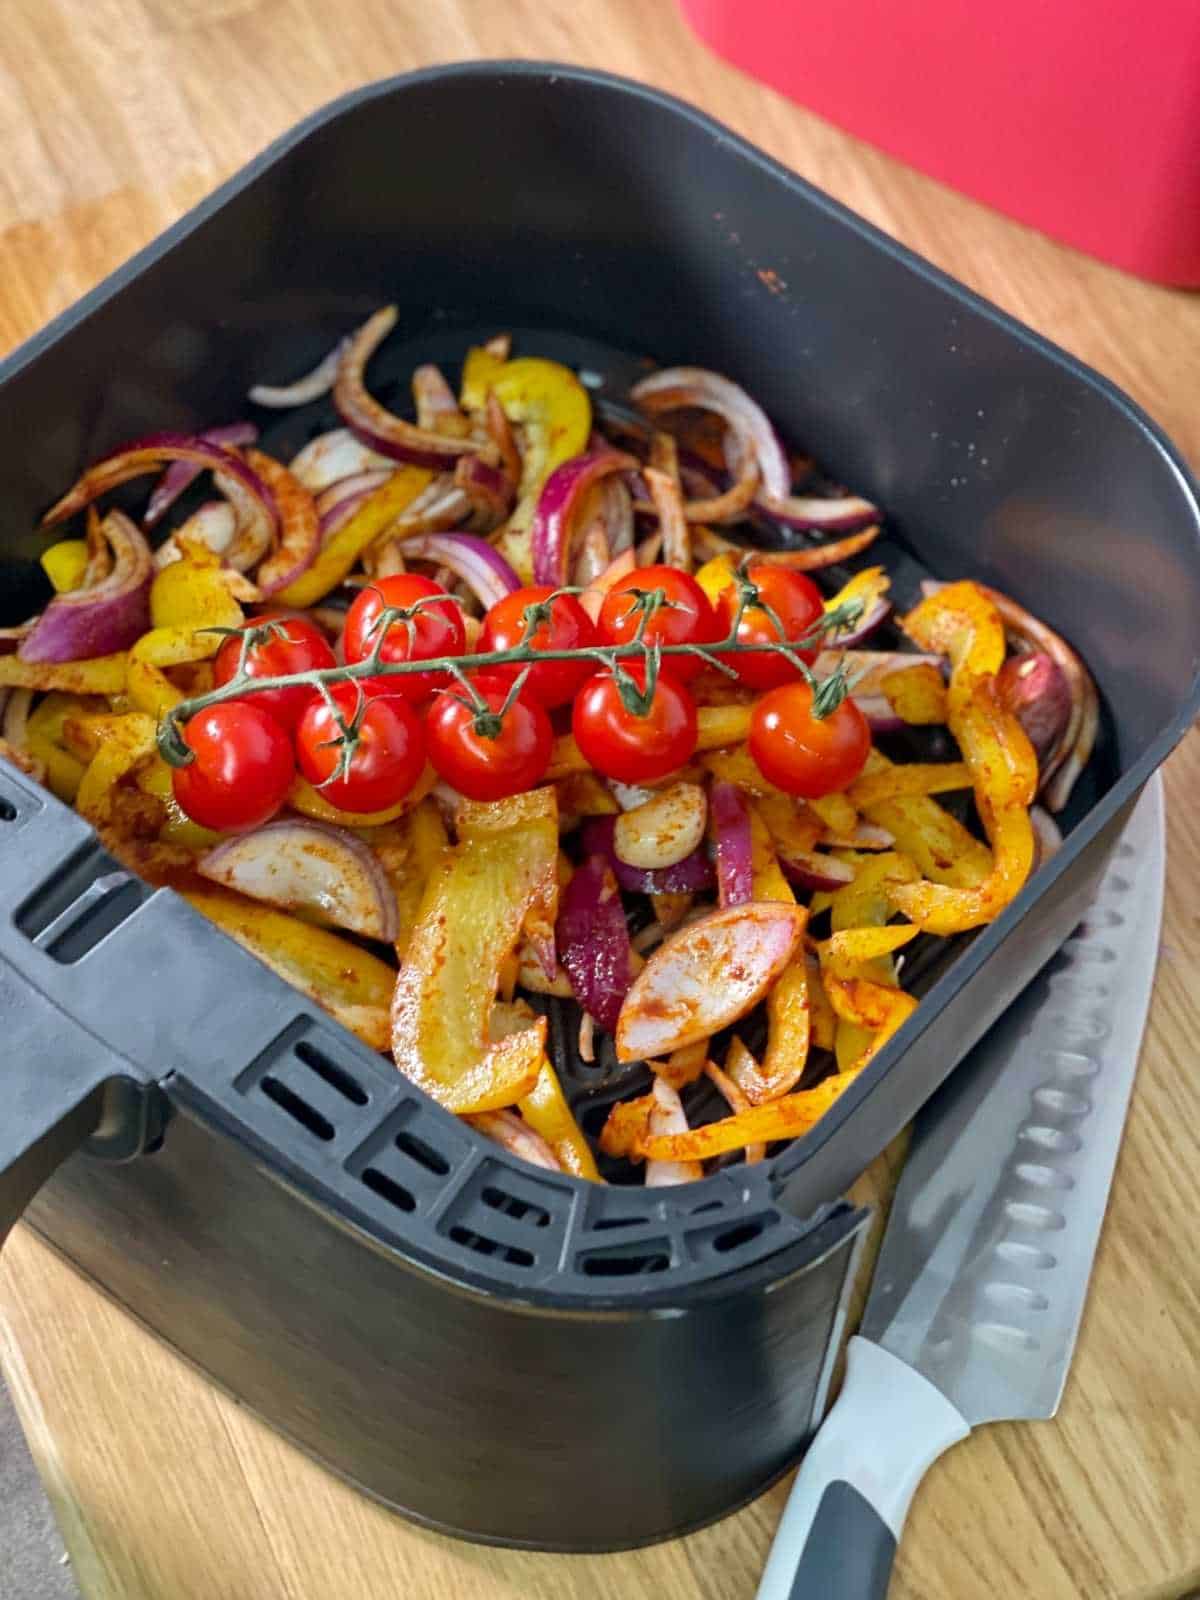 Sliced pepper, red onion, garlic mixed with paprika with cherry tomatoes on top, seen in Instant Vortex 4 in 1 drawer from above, there's a Zyliss Comfort Santoku knife on the side